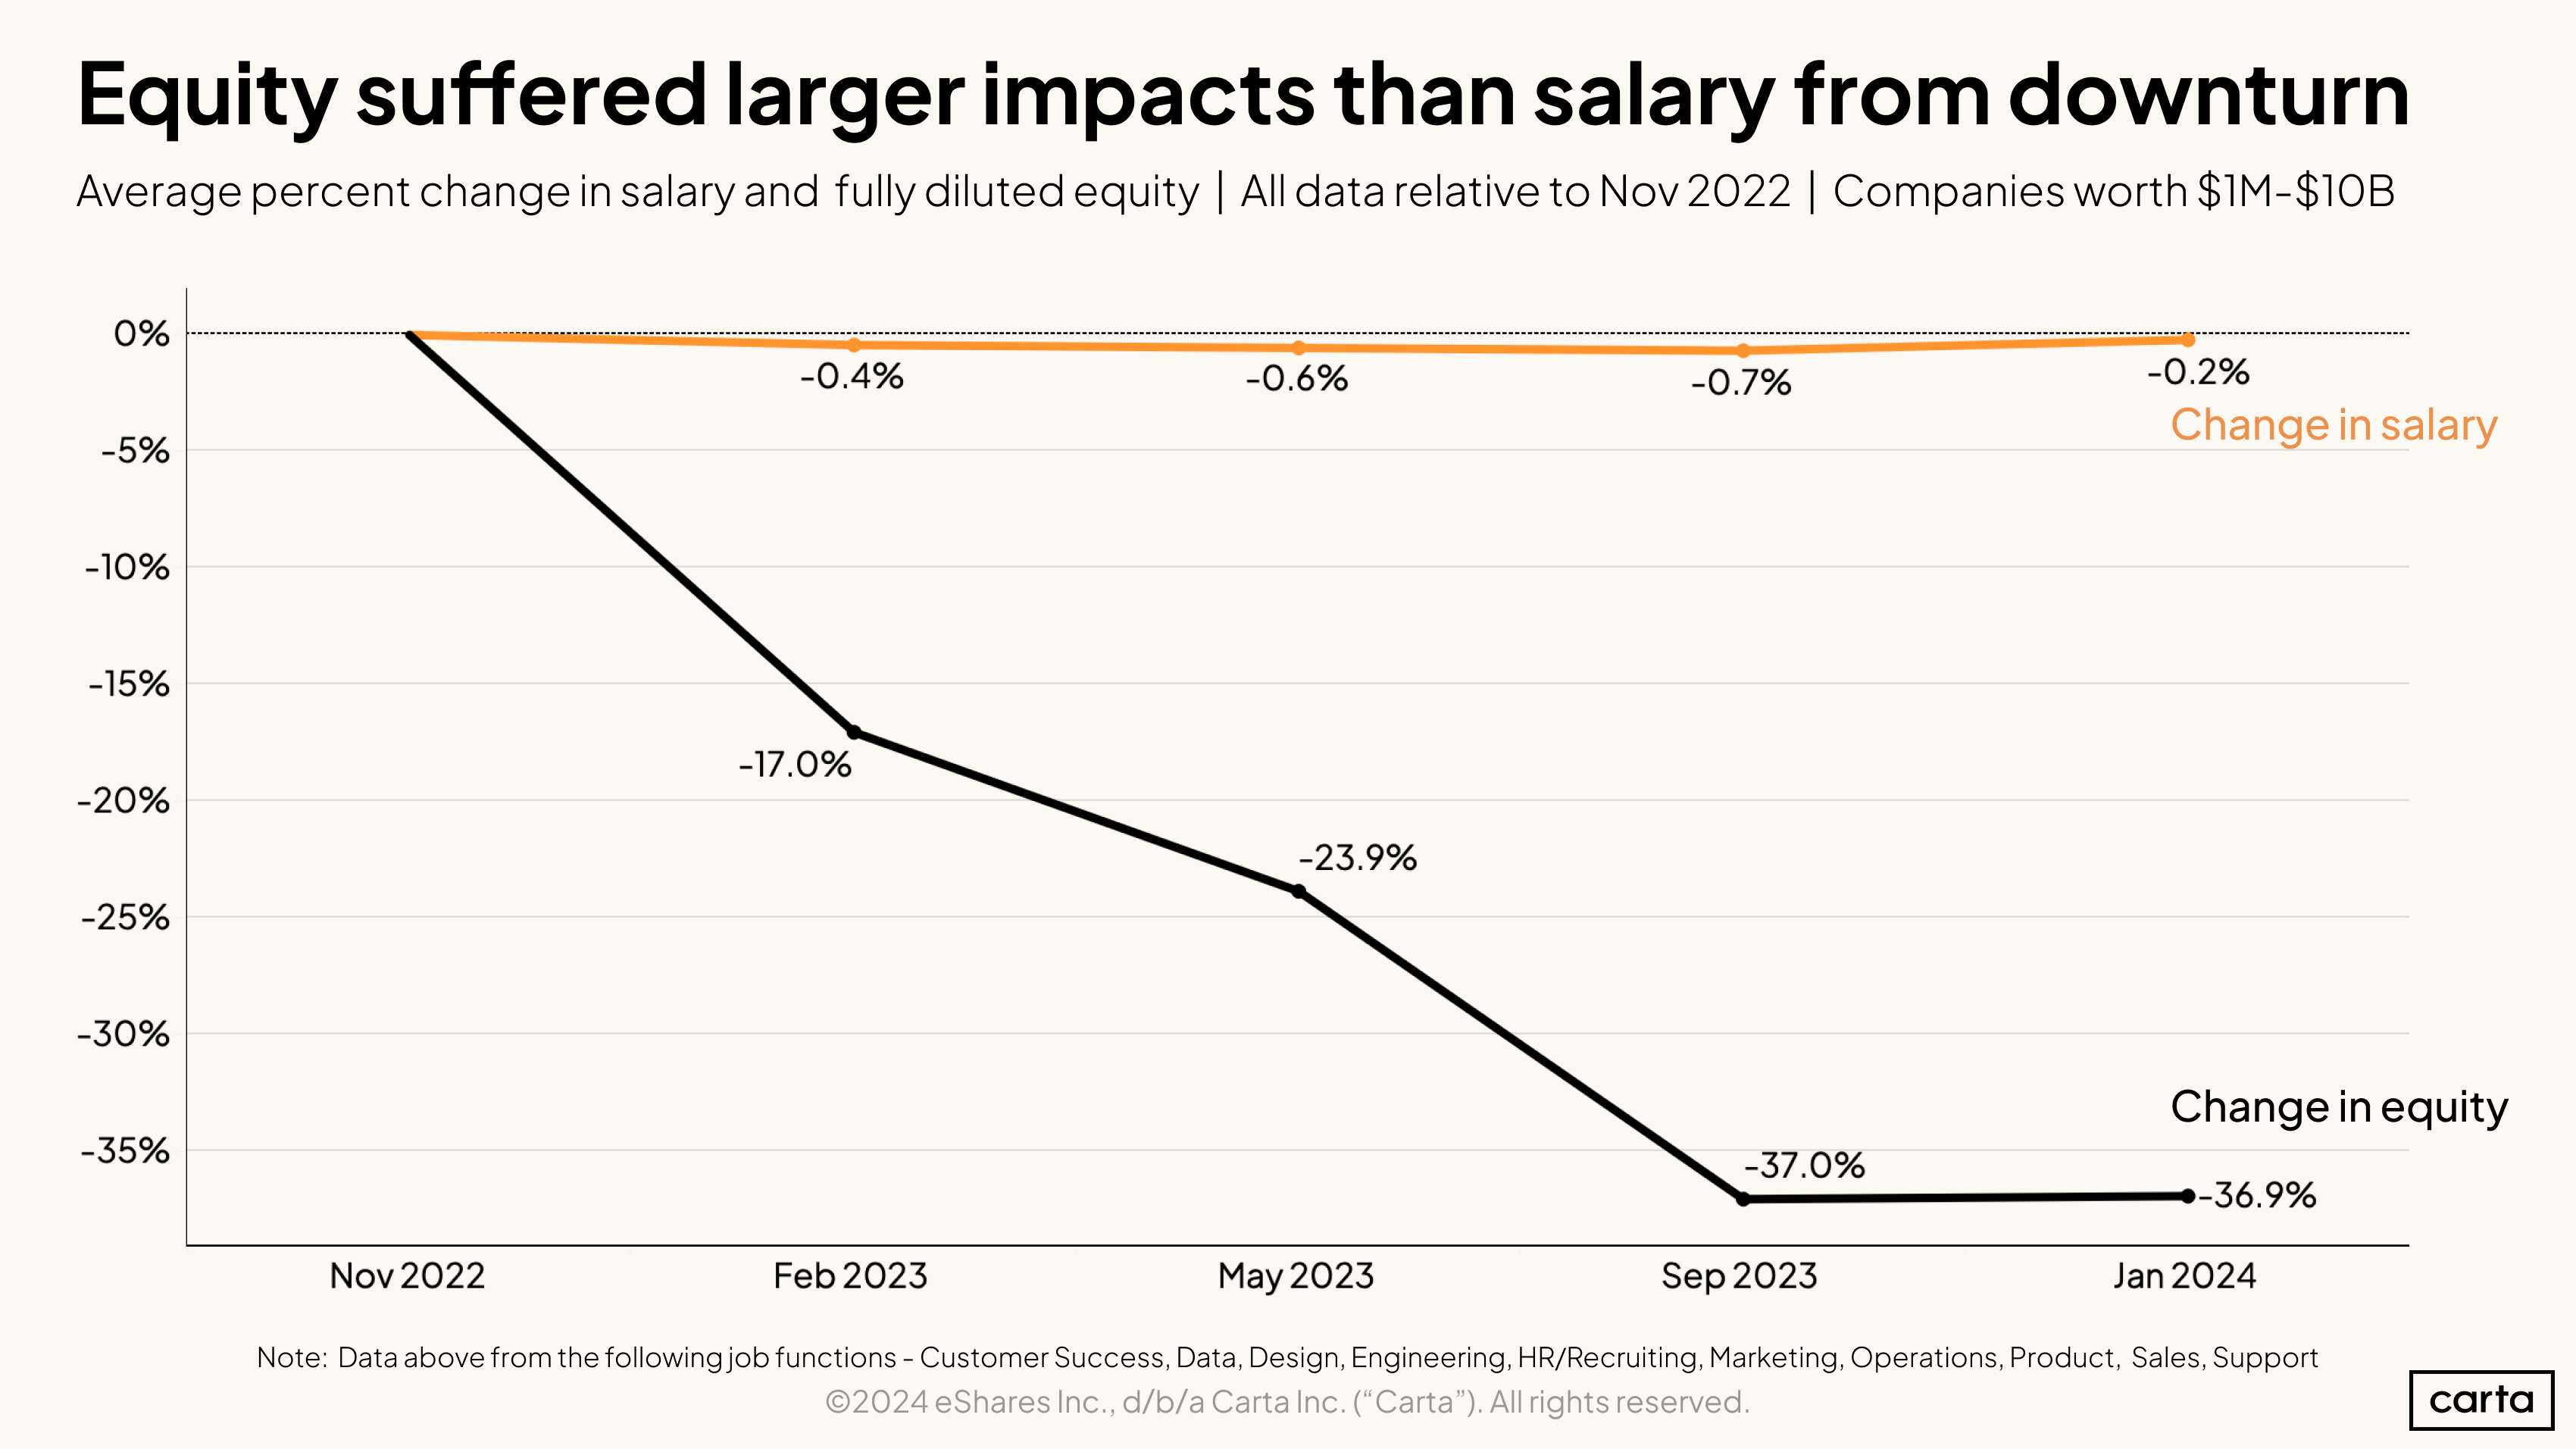 Equity suffered larger impacts than salary from downturn